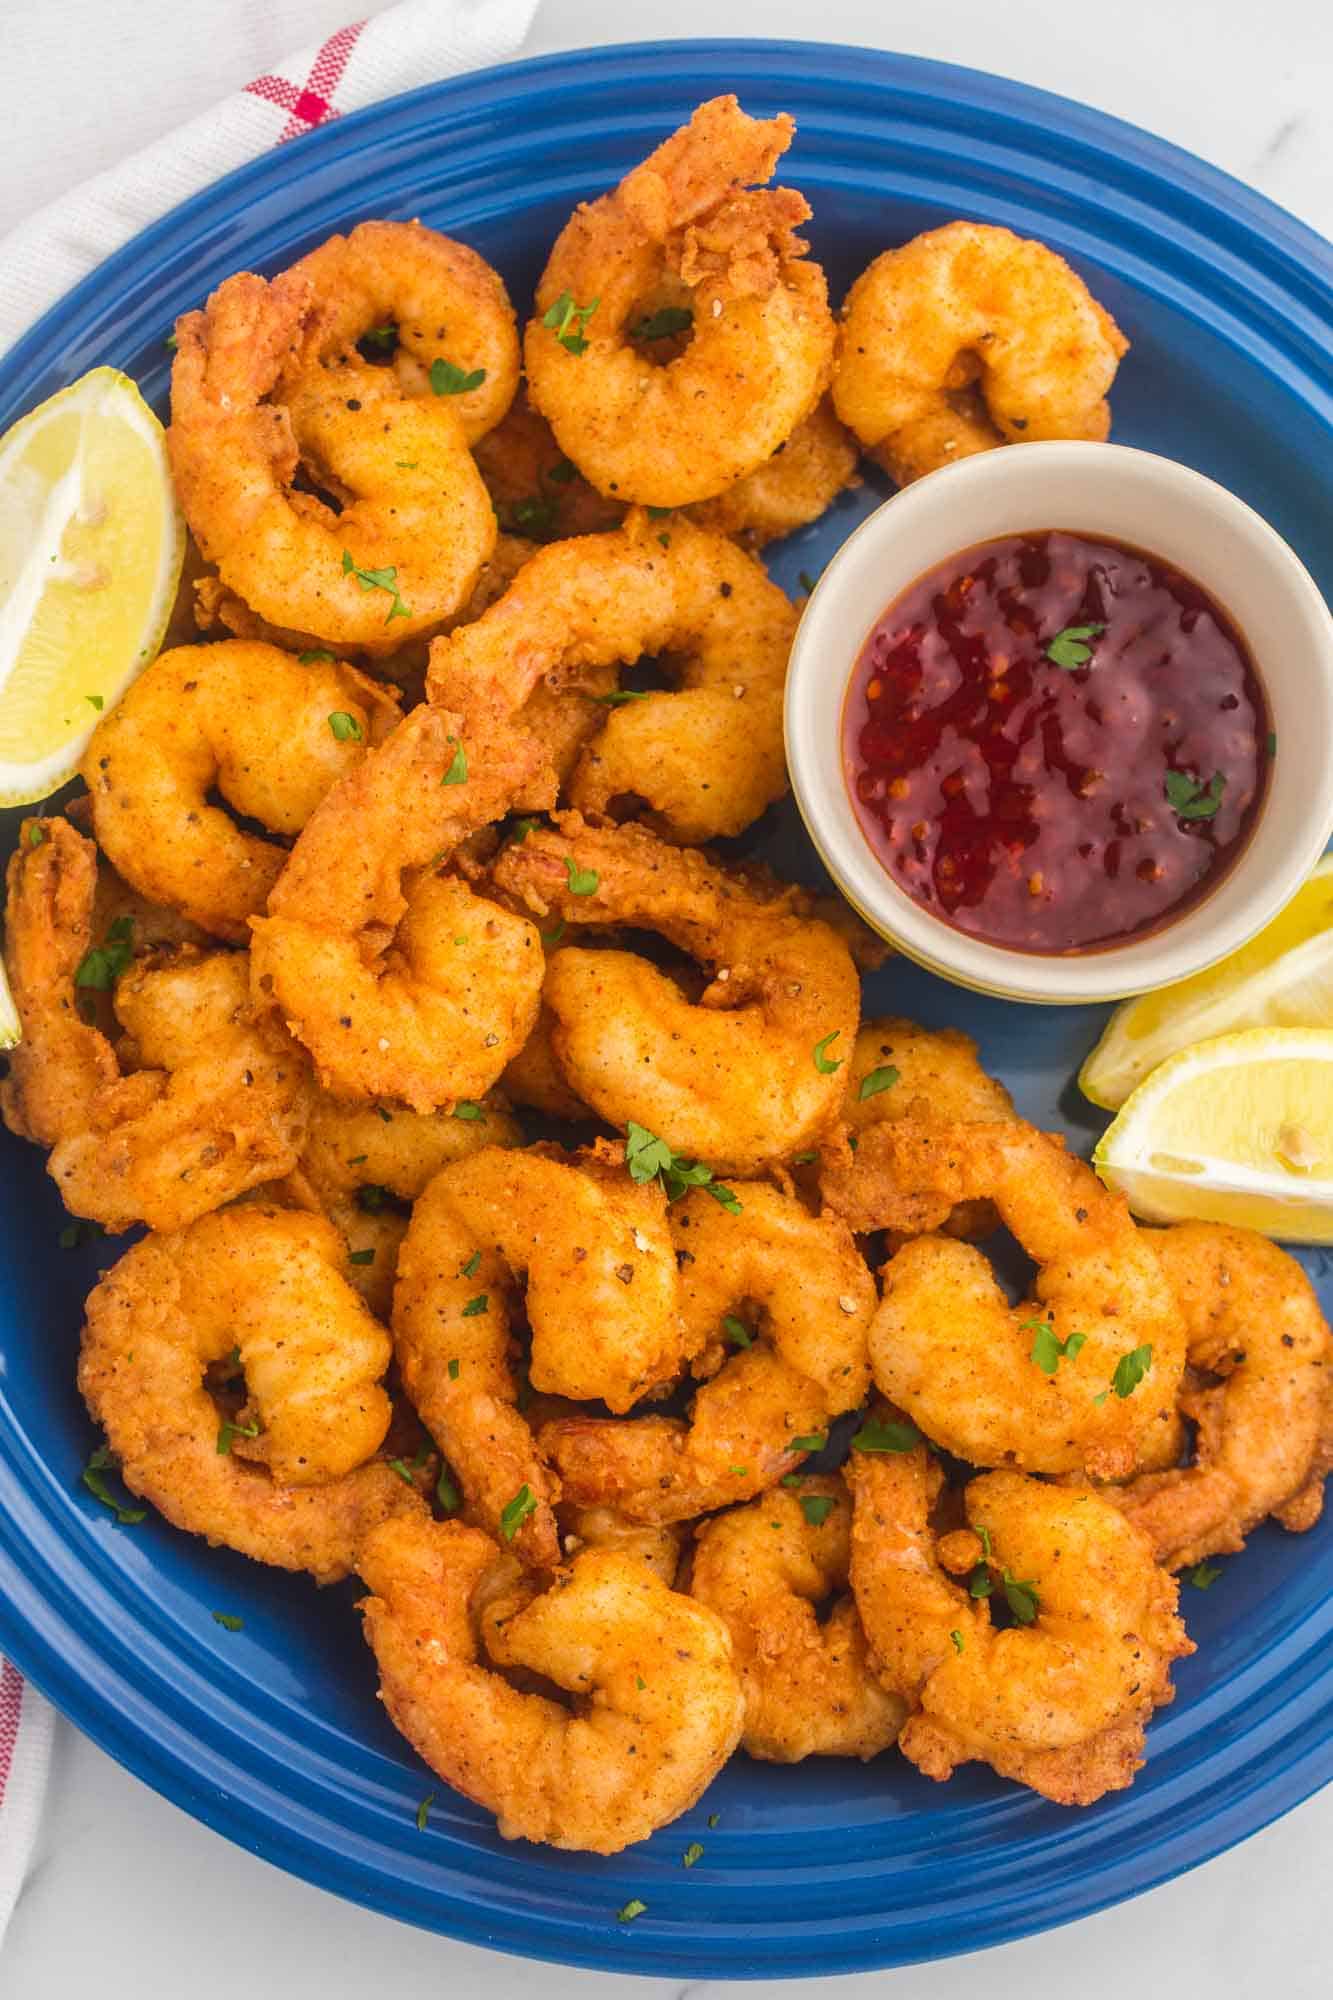 a large blue plate filled with fried shrimp. A cup of sweet chili sauce is on the side and the plate is garnished with lemon wedges